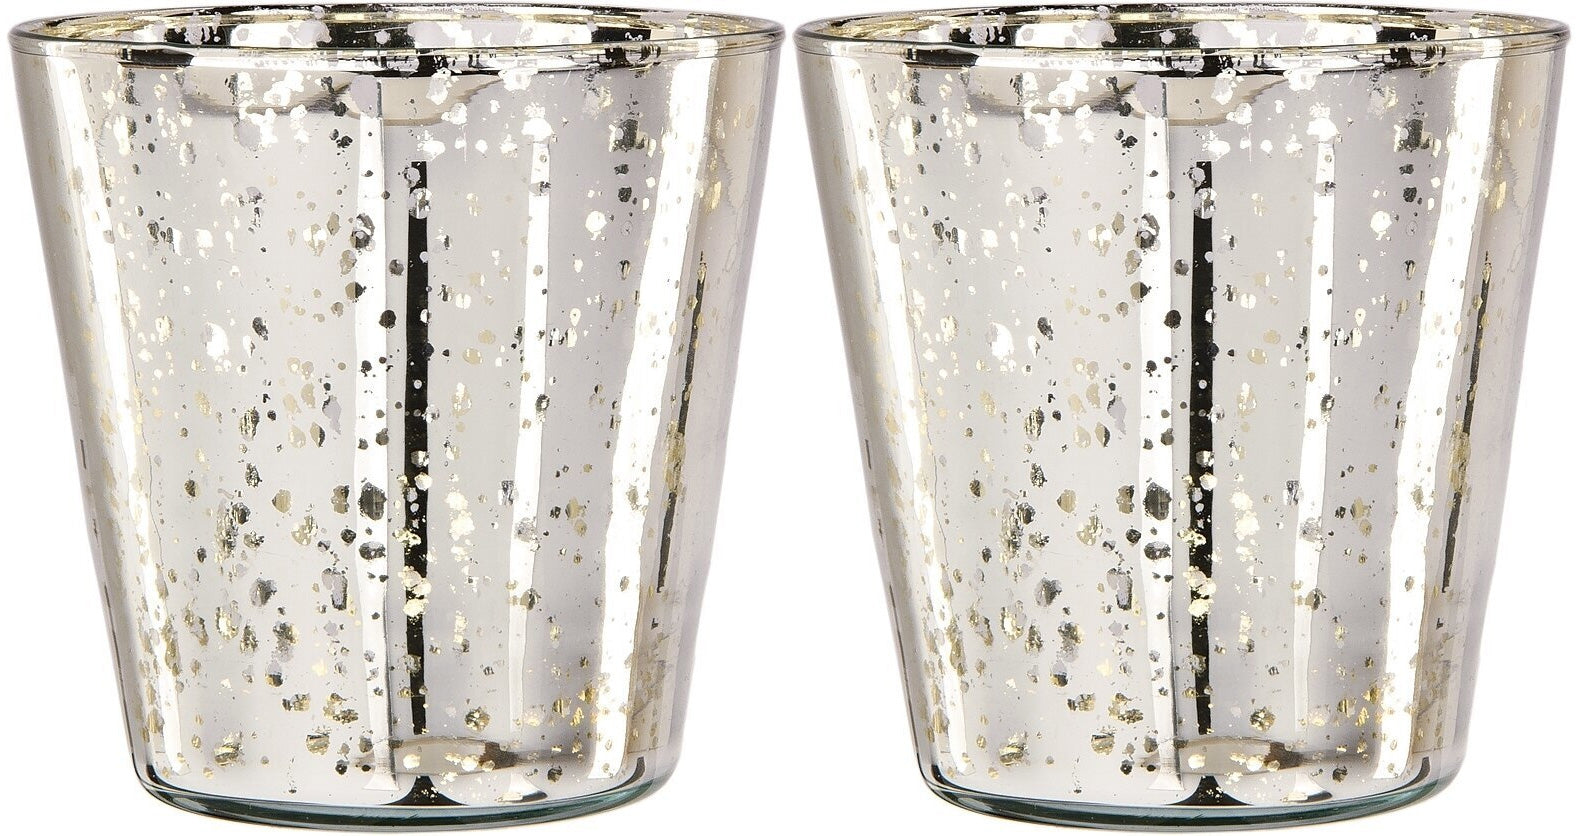 2 PACK | Vintage Mercury Glass Candle Holder (4-Inch, Jenna Design Cup, Silver) - Decorative Candle Holder - For Home Decor, Parties and Wedding Decorations - PaperLanternStore.com - Paper Lanterns, Decor, Party Lights & More